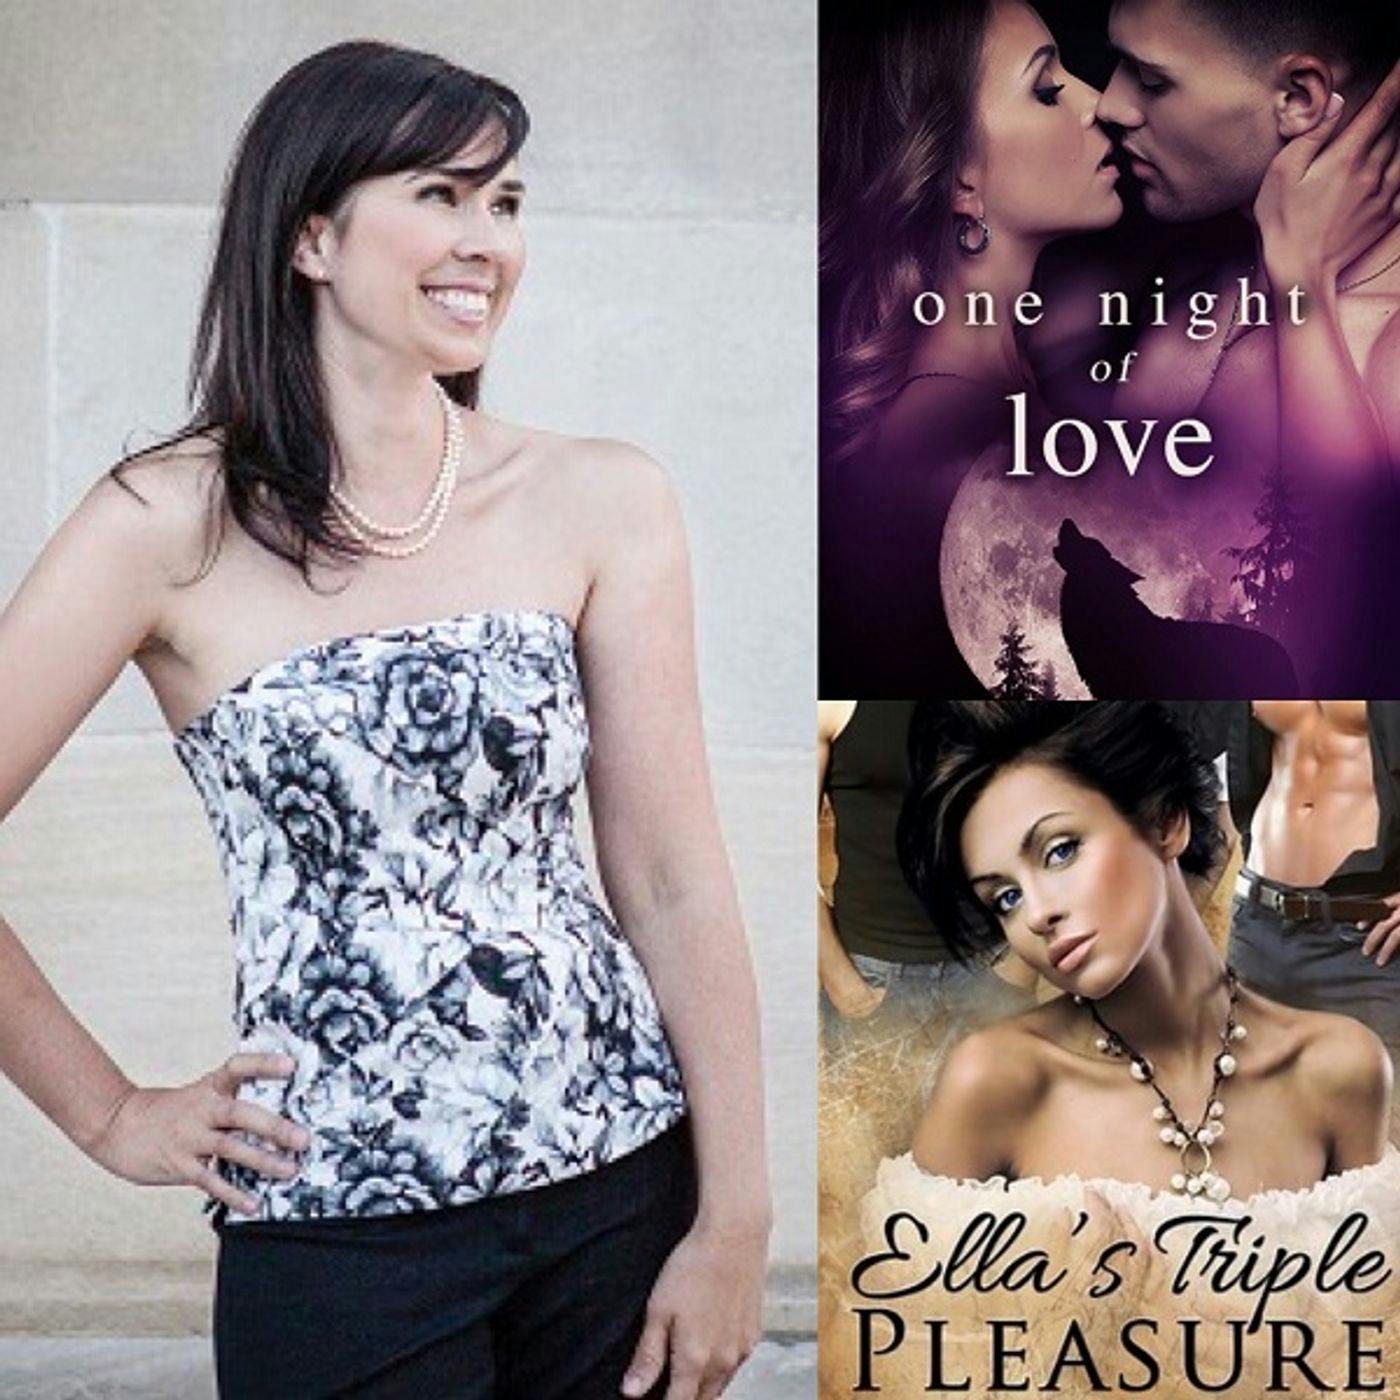 Romance and Erotic Fiction Author Anna Lores